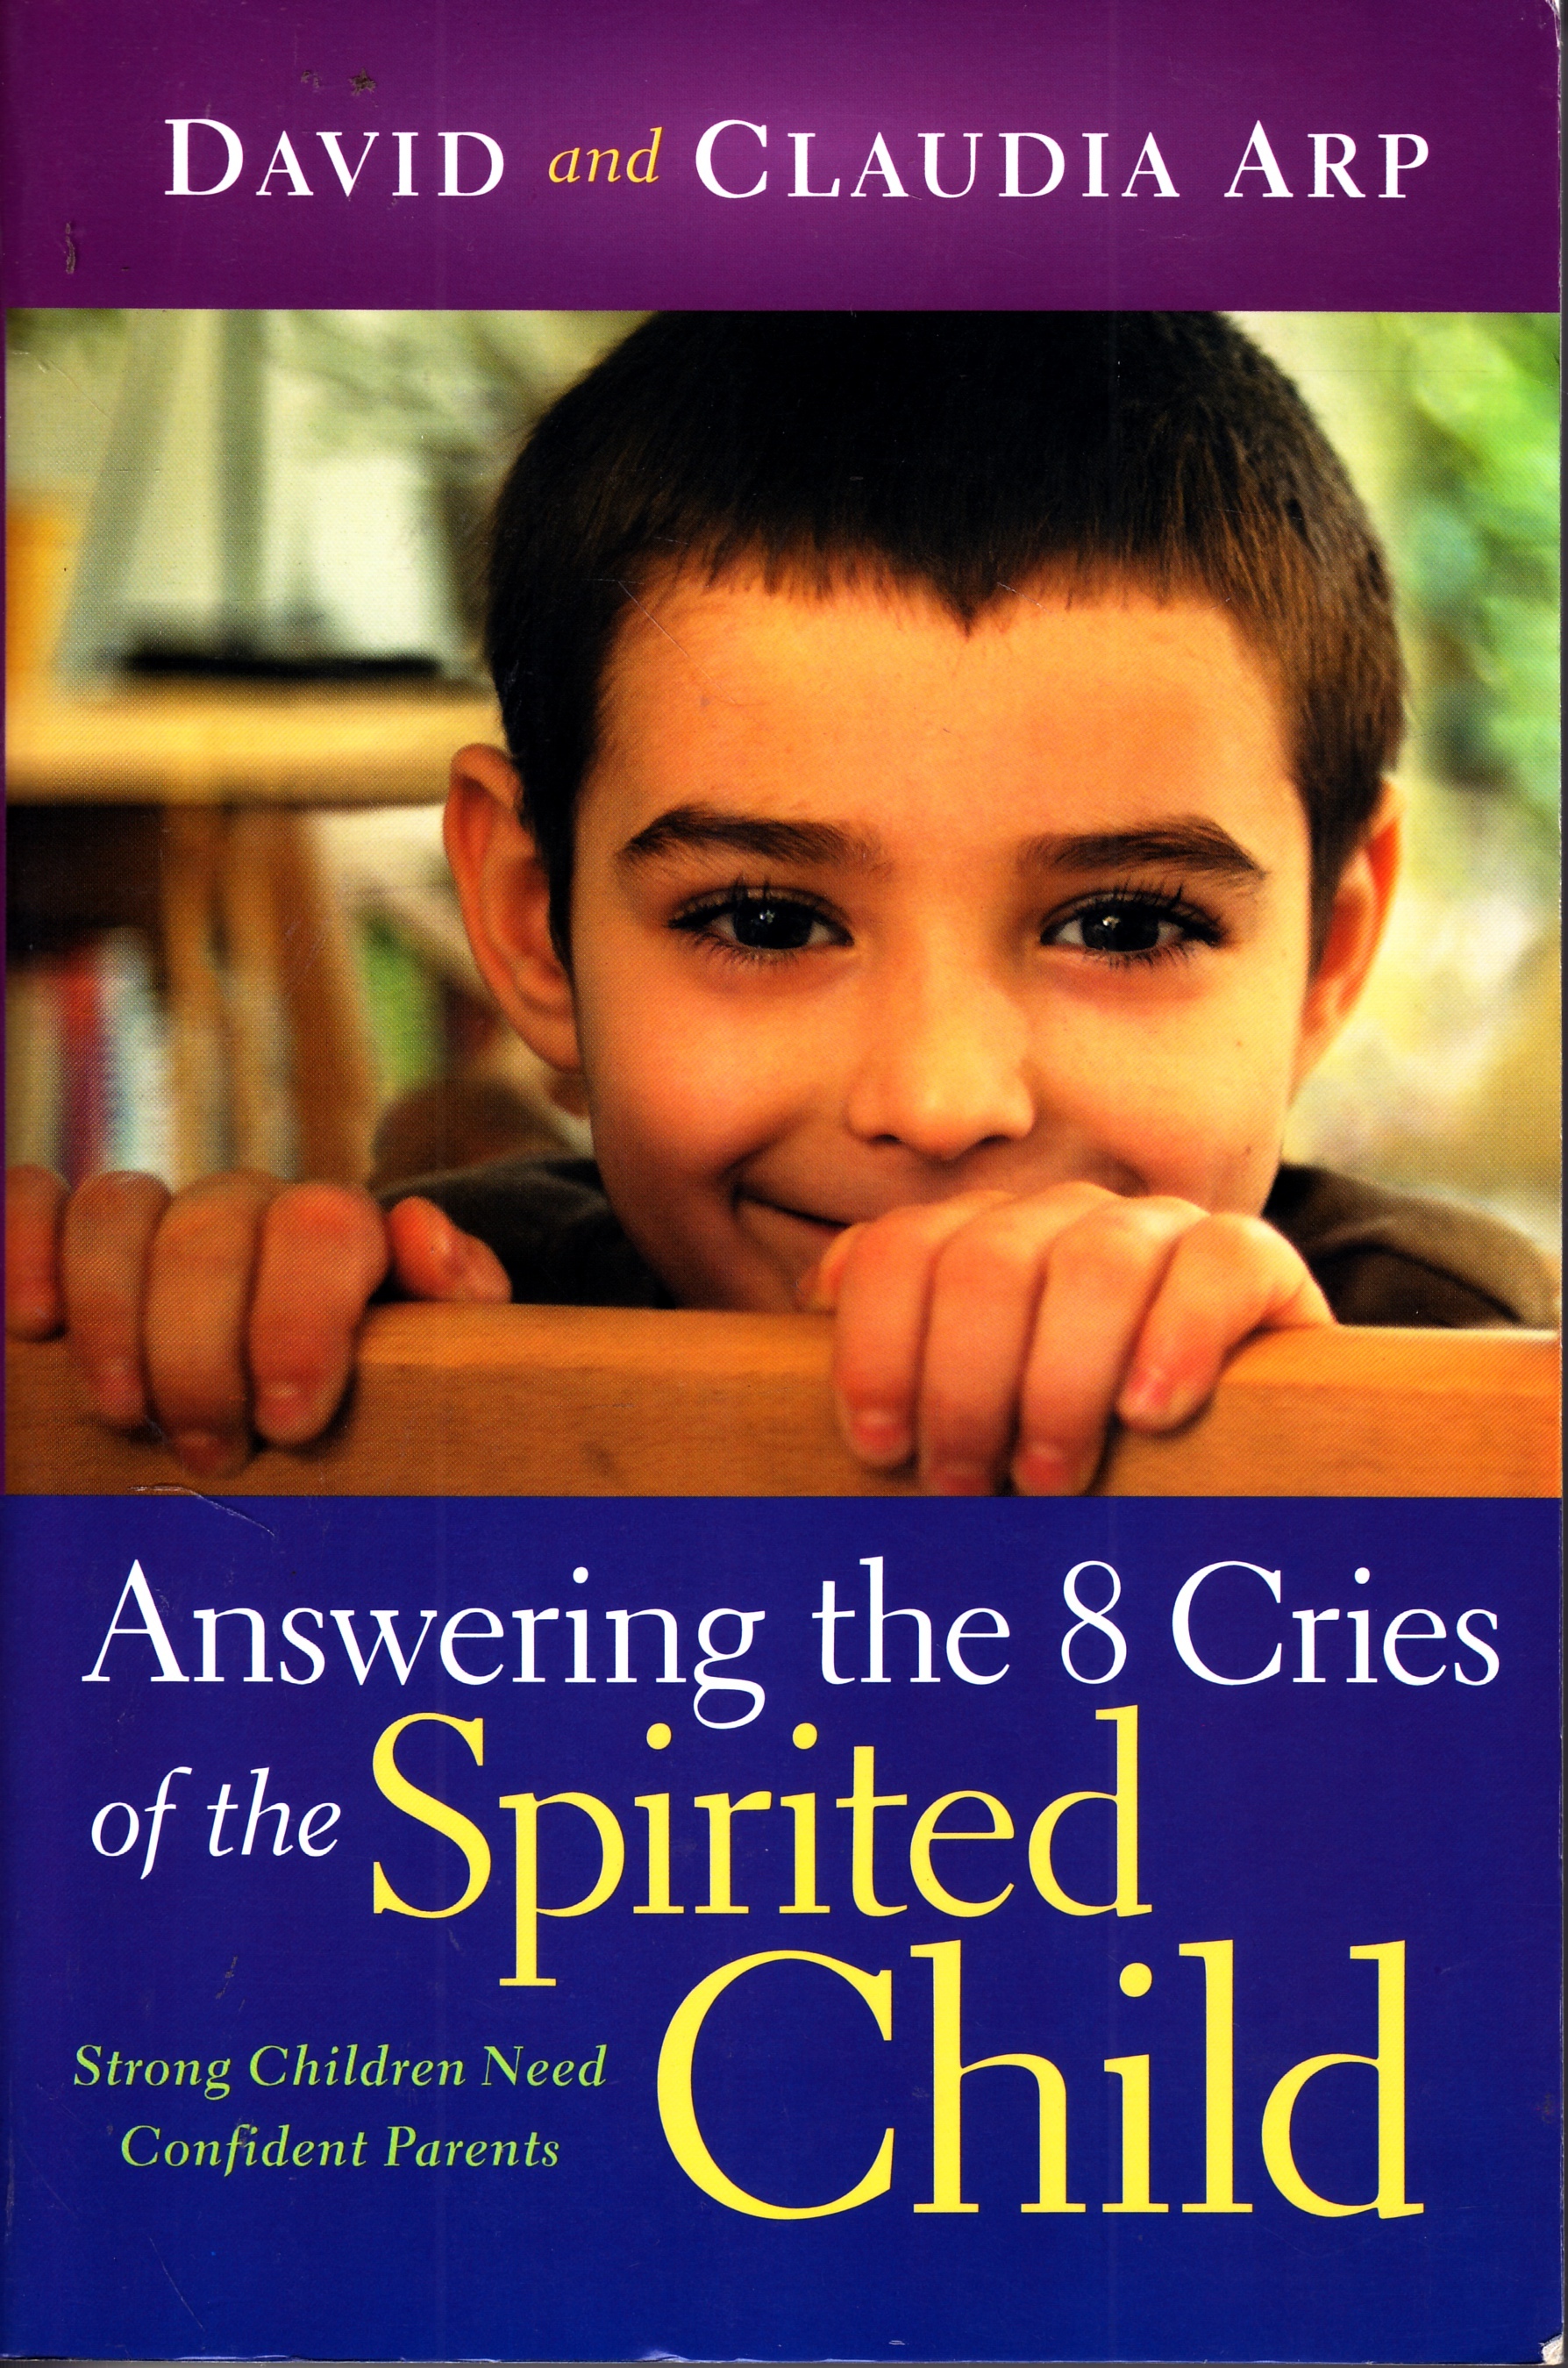 Image for Answering the 8 Cries of the Spirited Child Strong Children Need Confident Parents